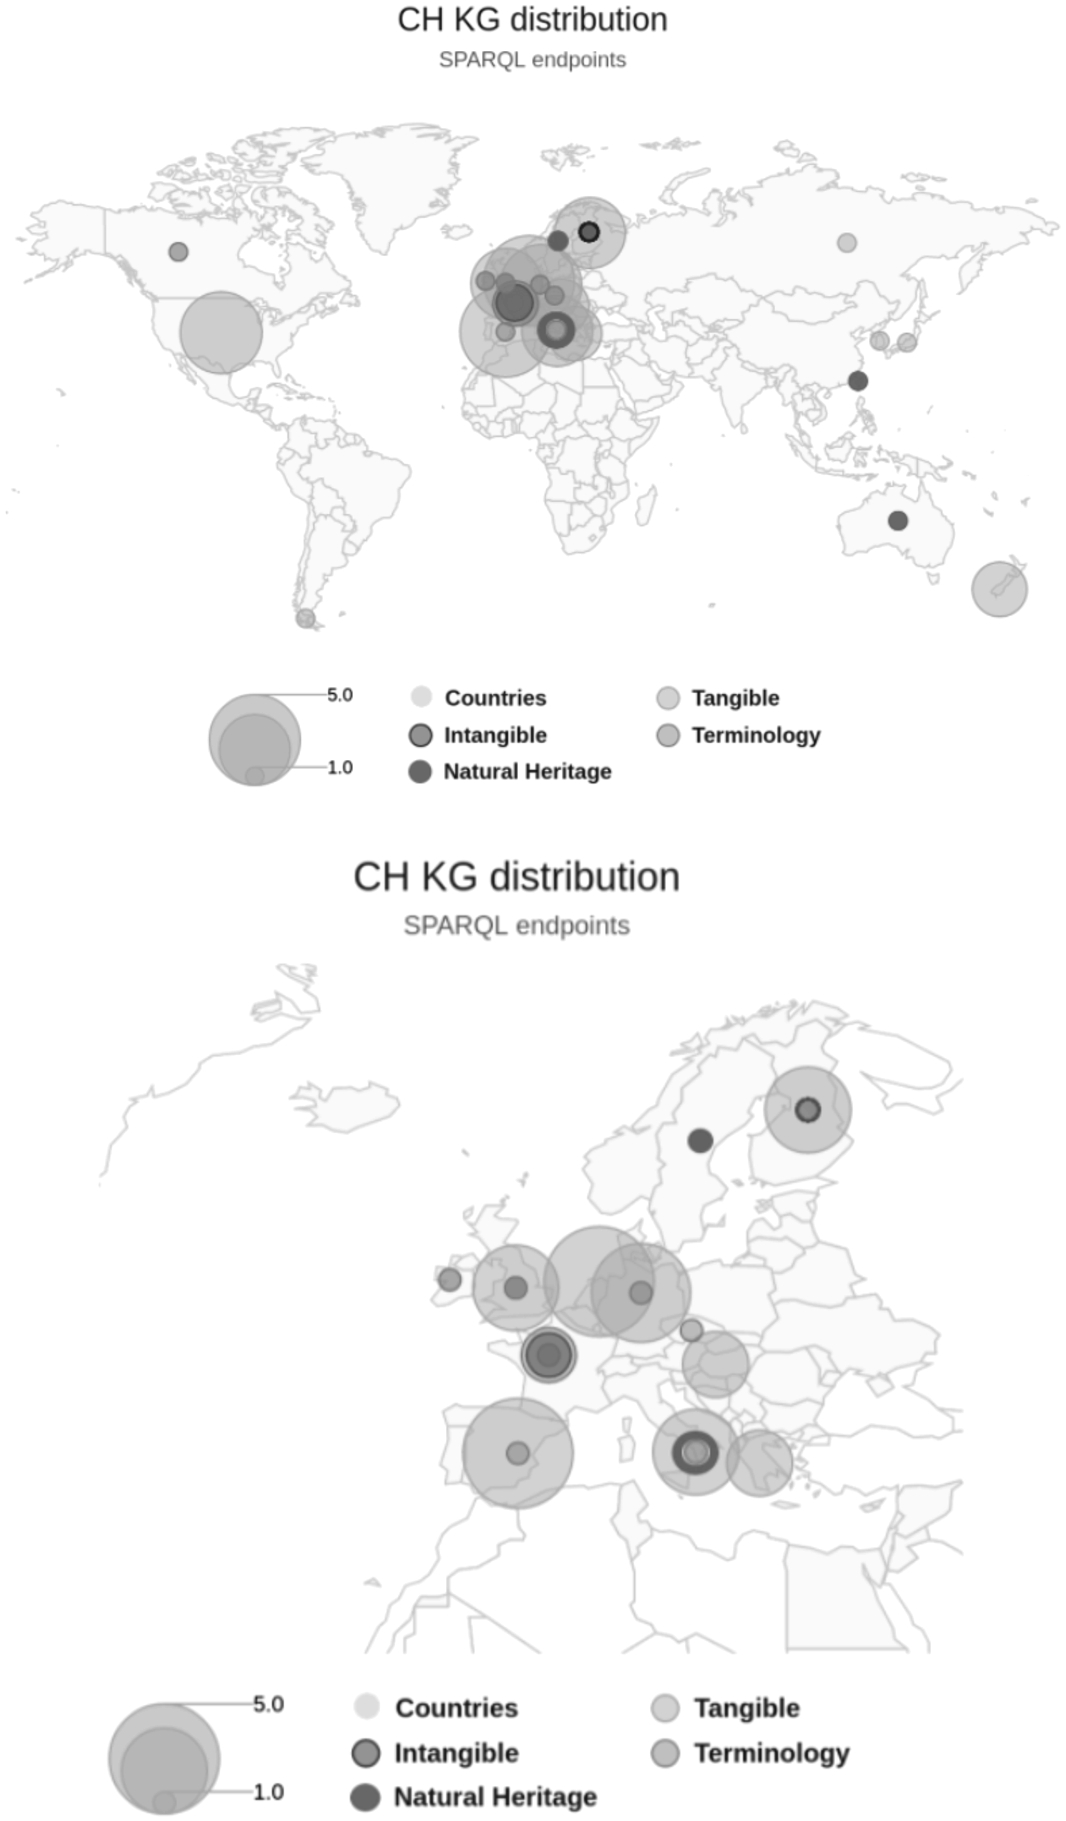 Geographical distribution of CH KGs. The bubble size represents the number of available CH KGs.